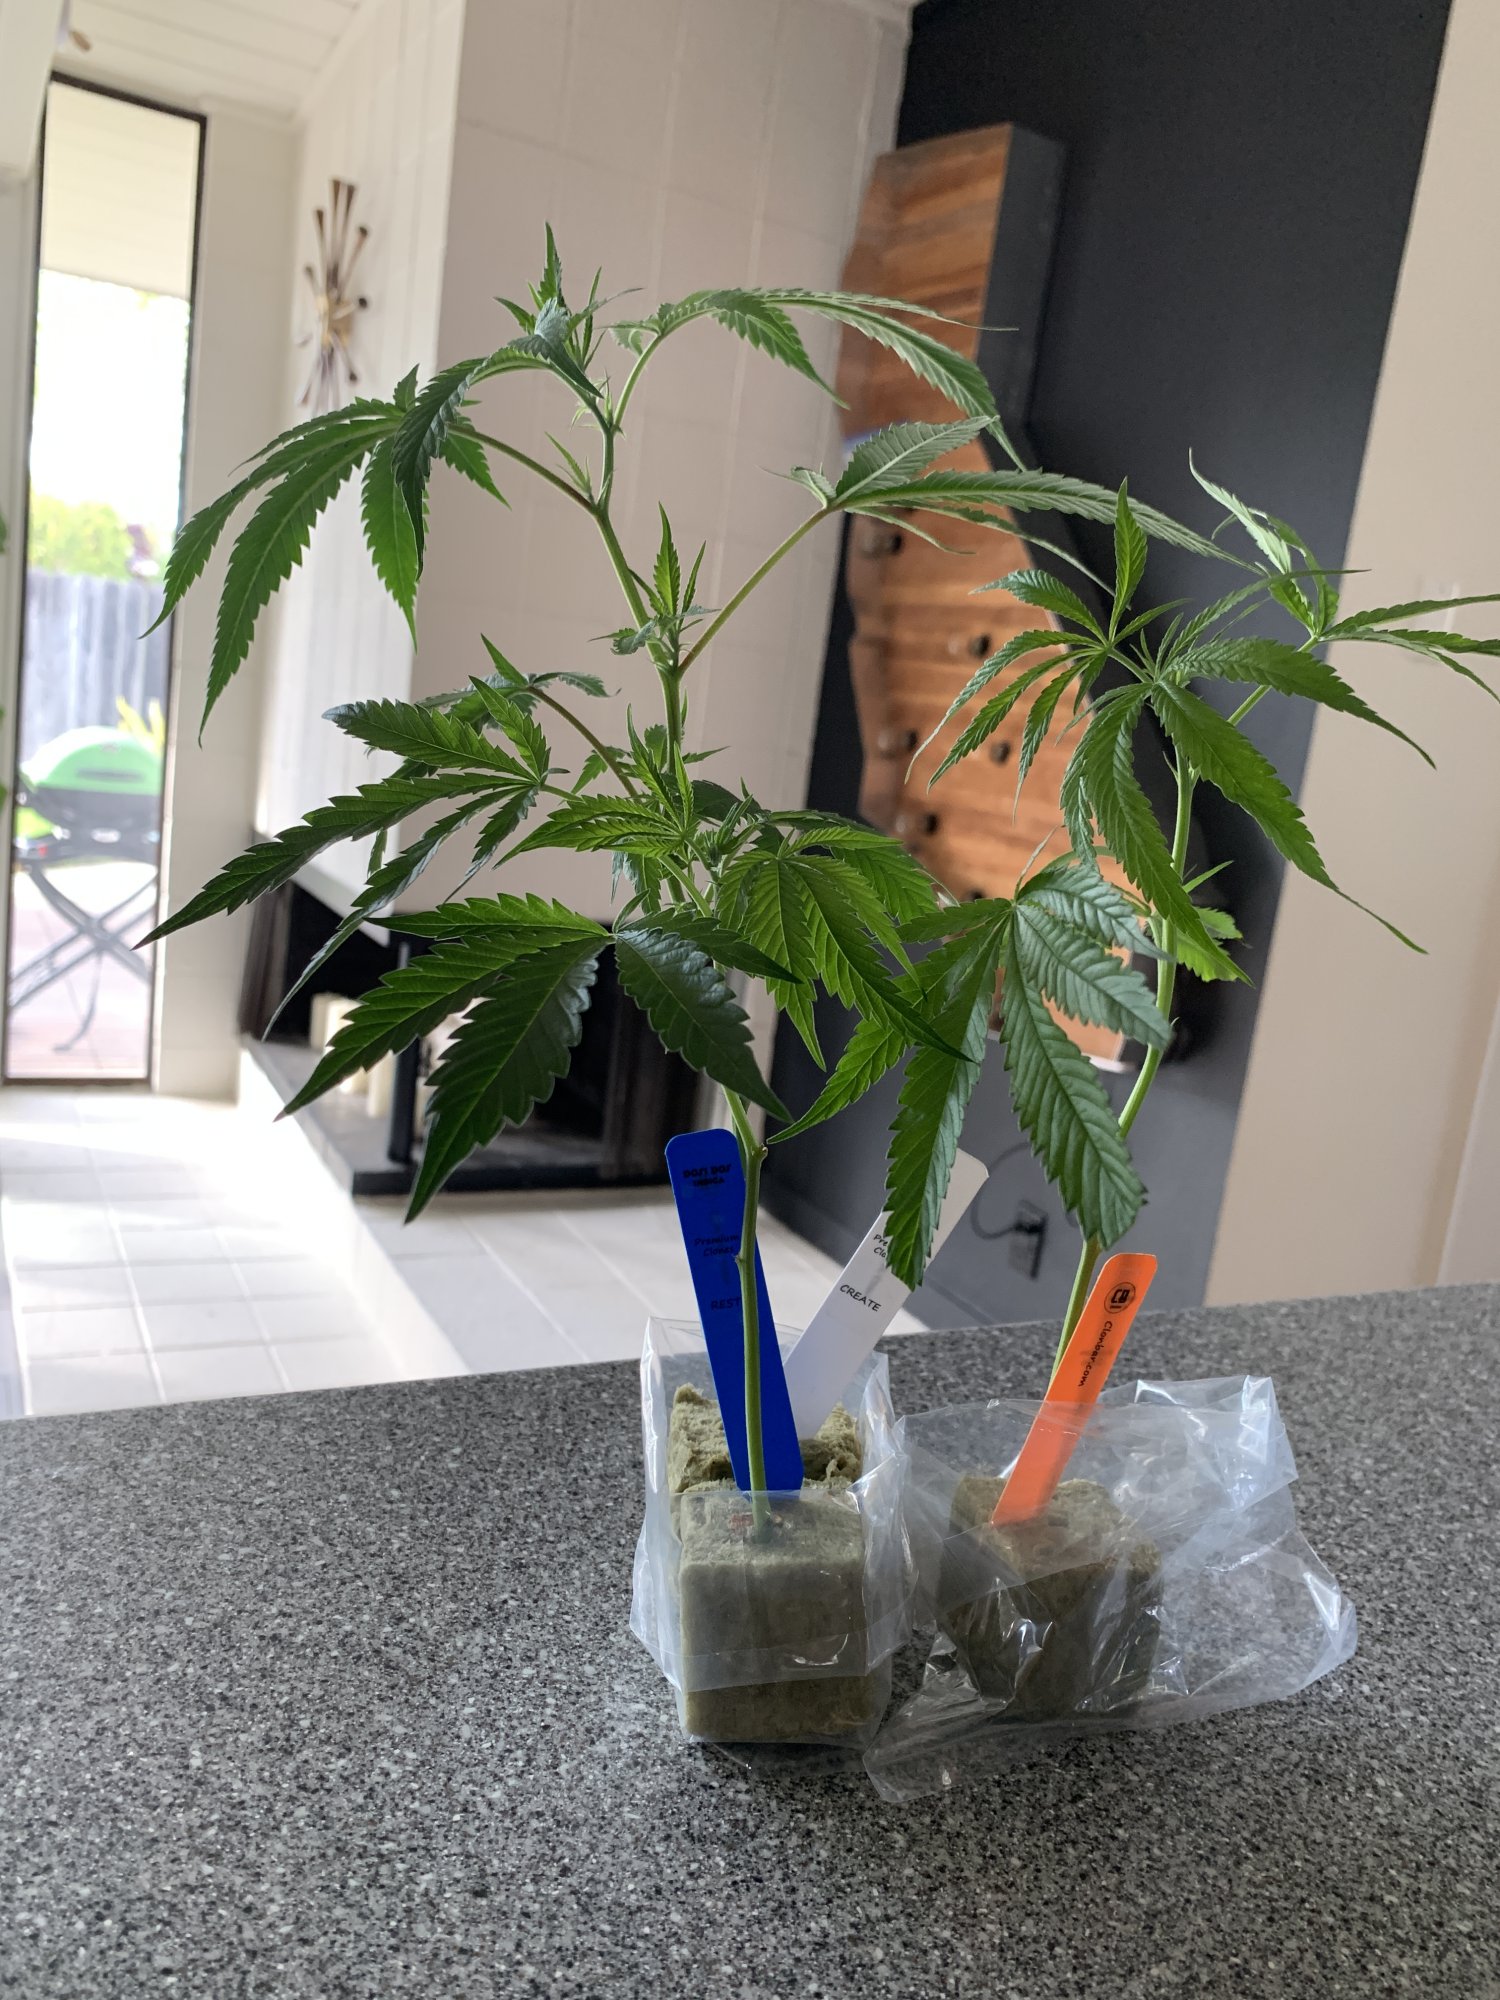 Asking for a little help for a new grower